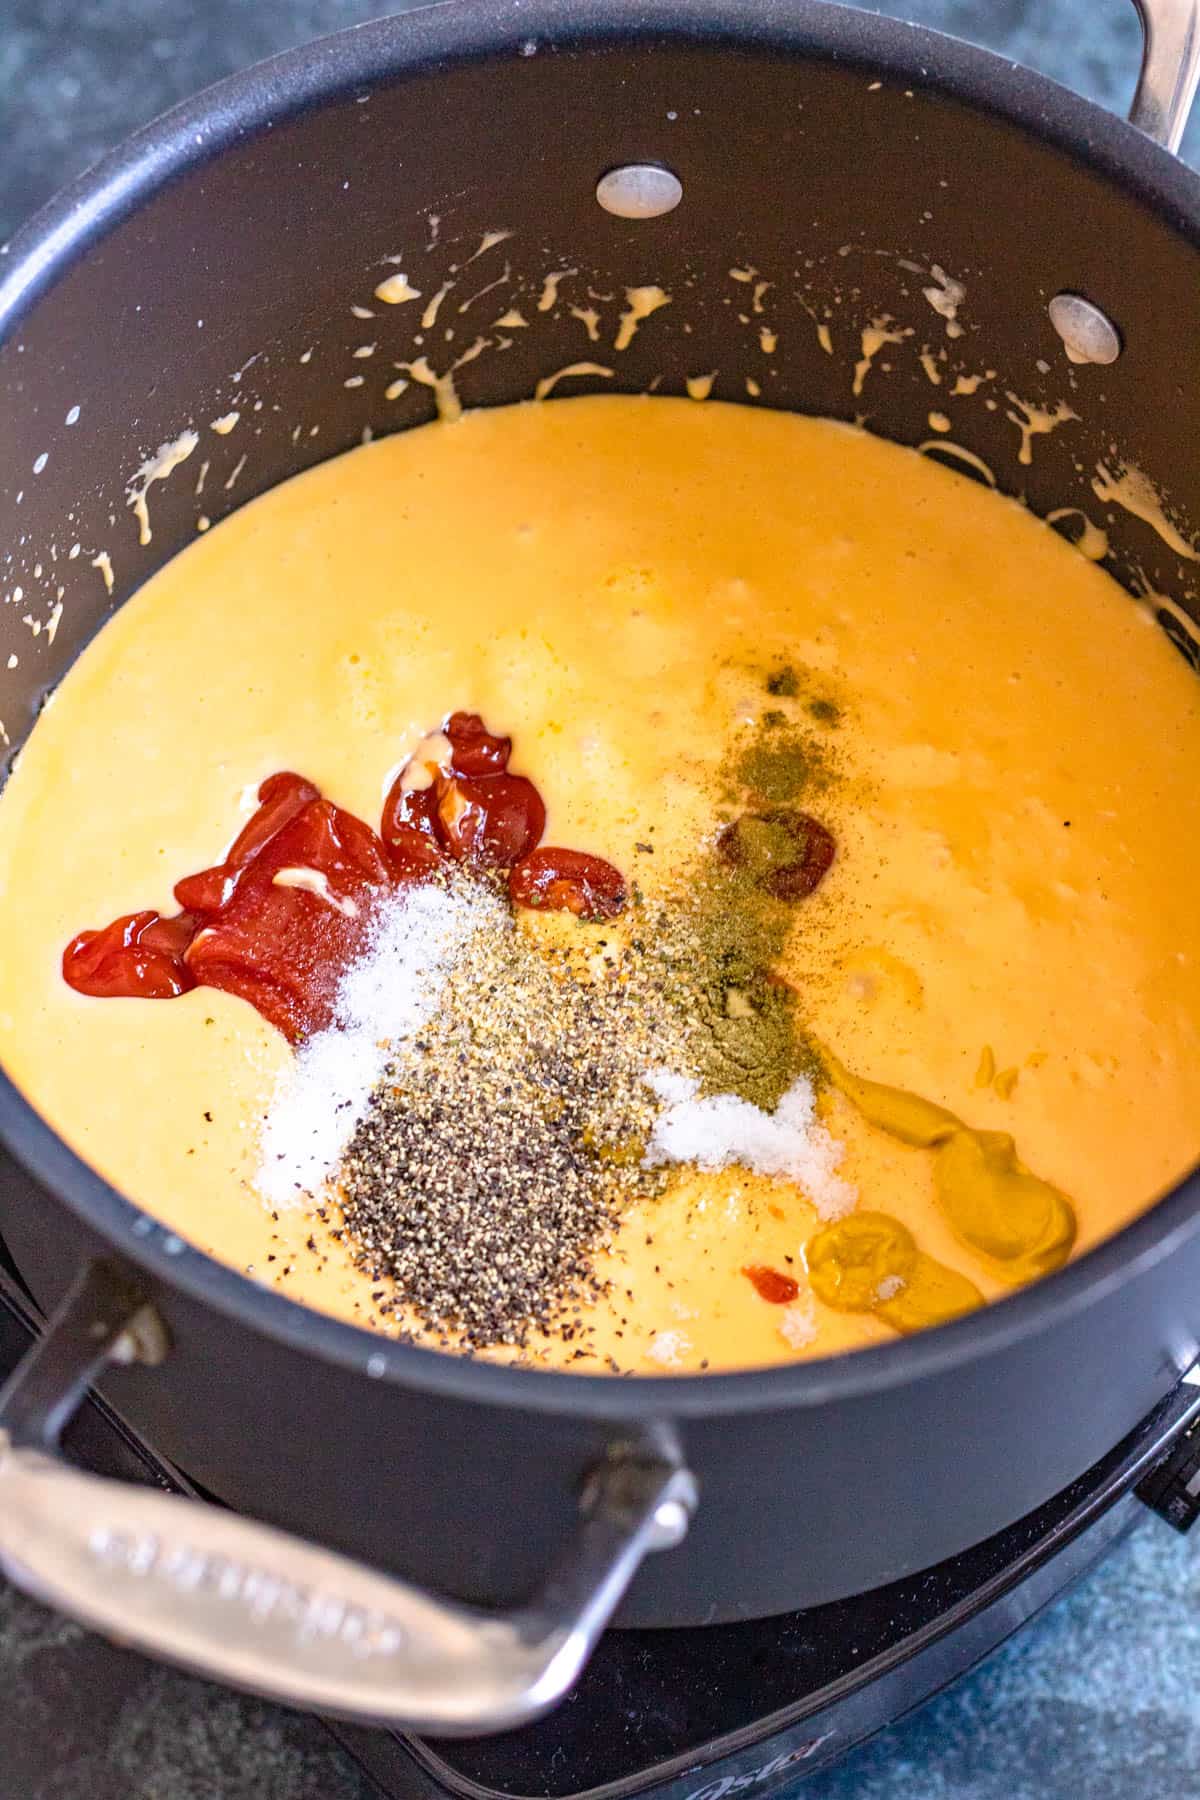 Ketchup, seasonings, mustard added to the roux. 